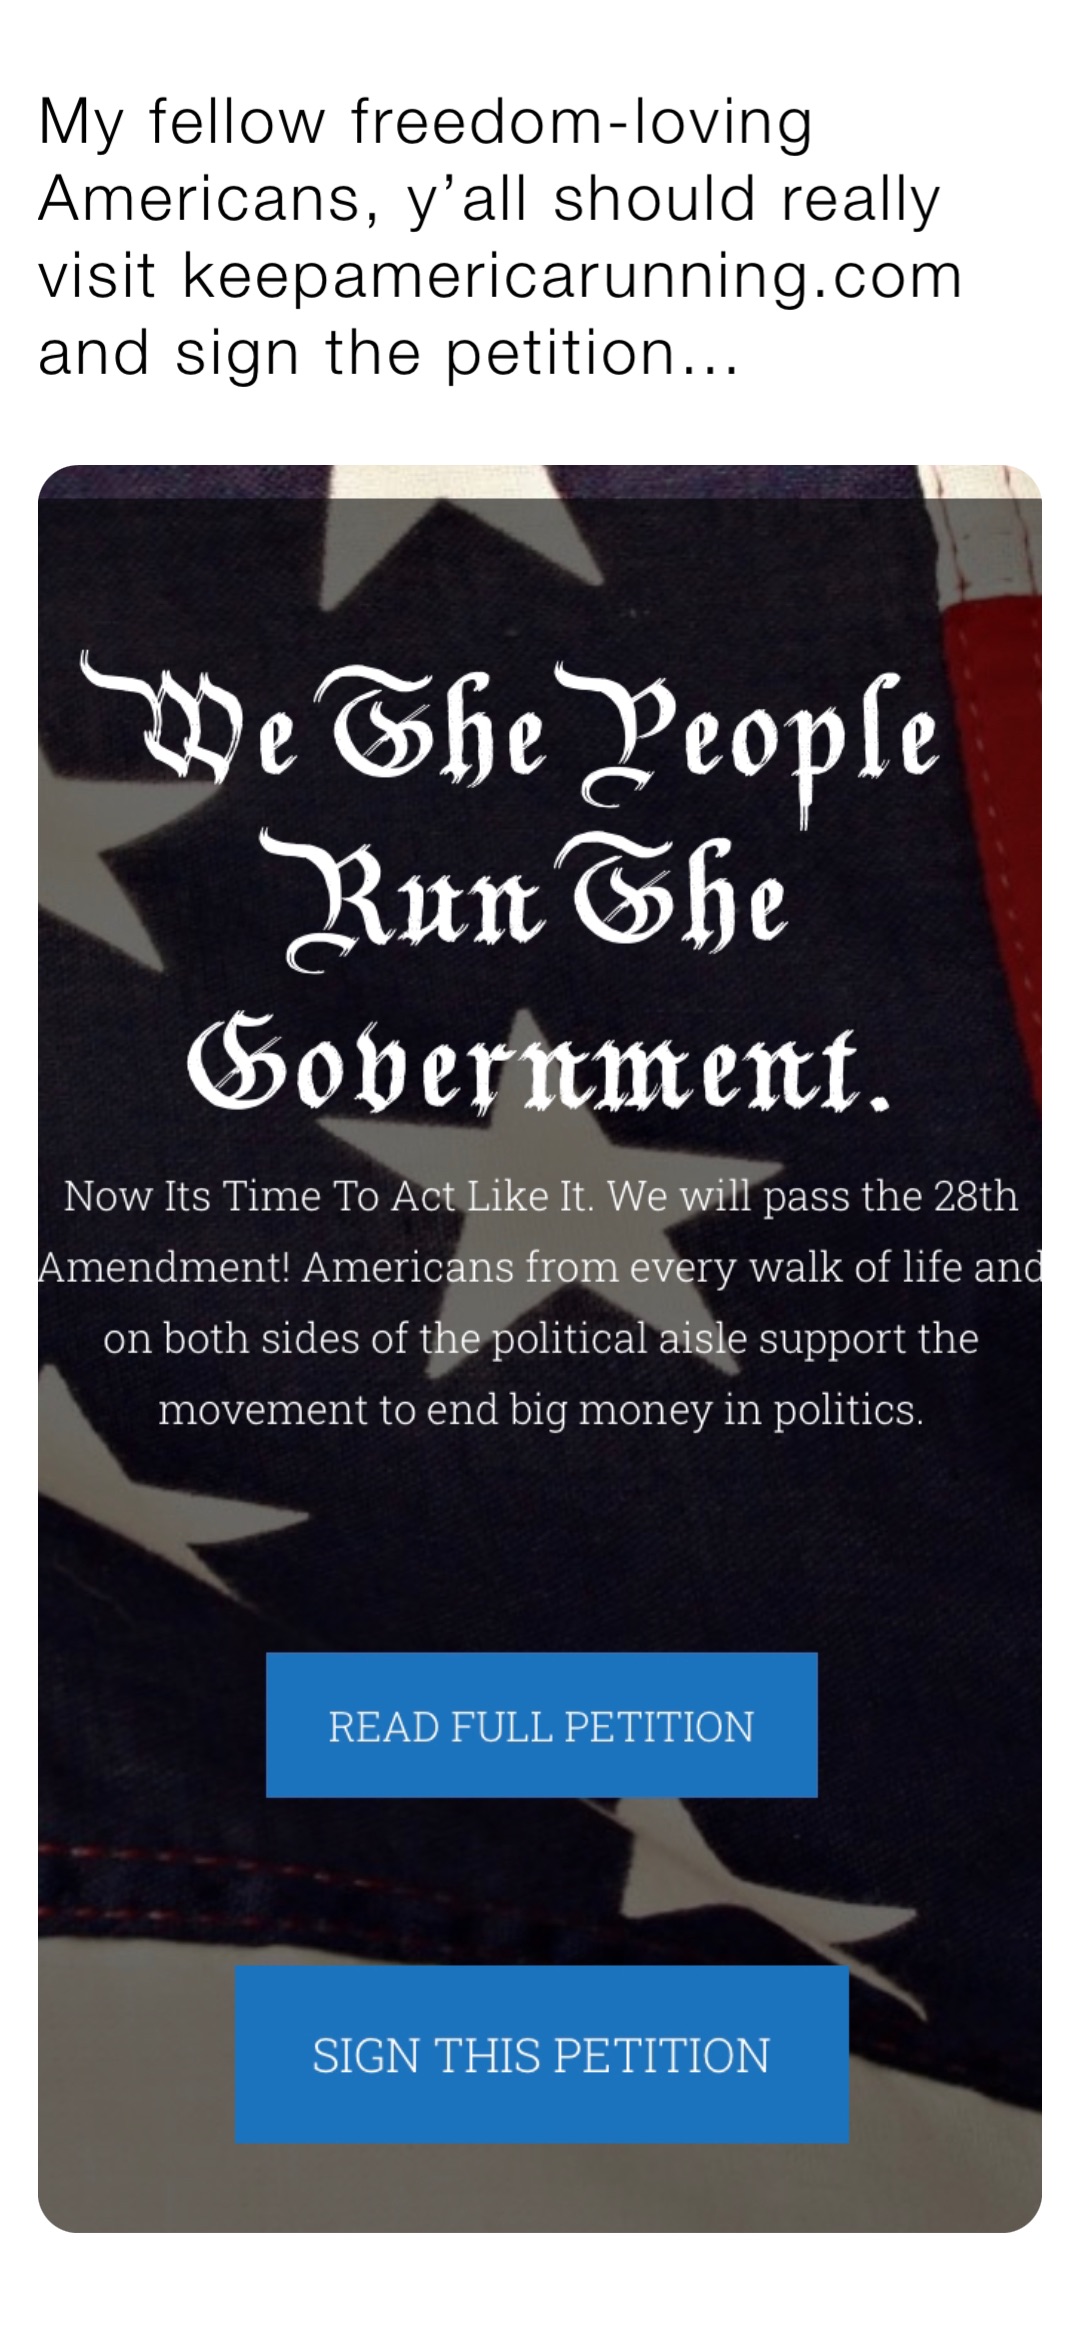 My fellow freedom-loving Americans, y’all should really visit keepamericarunning.com and sign the petition…